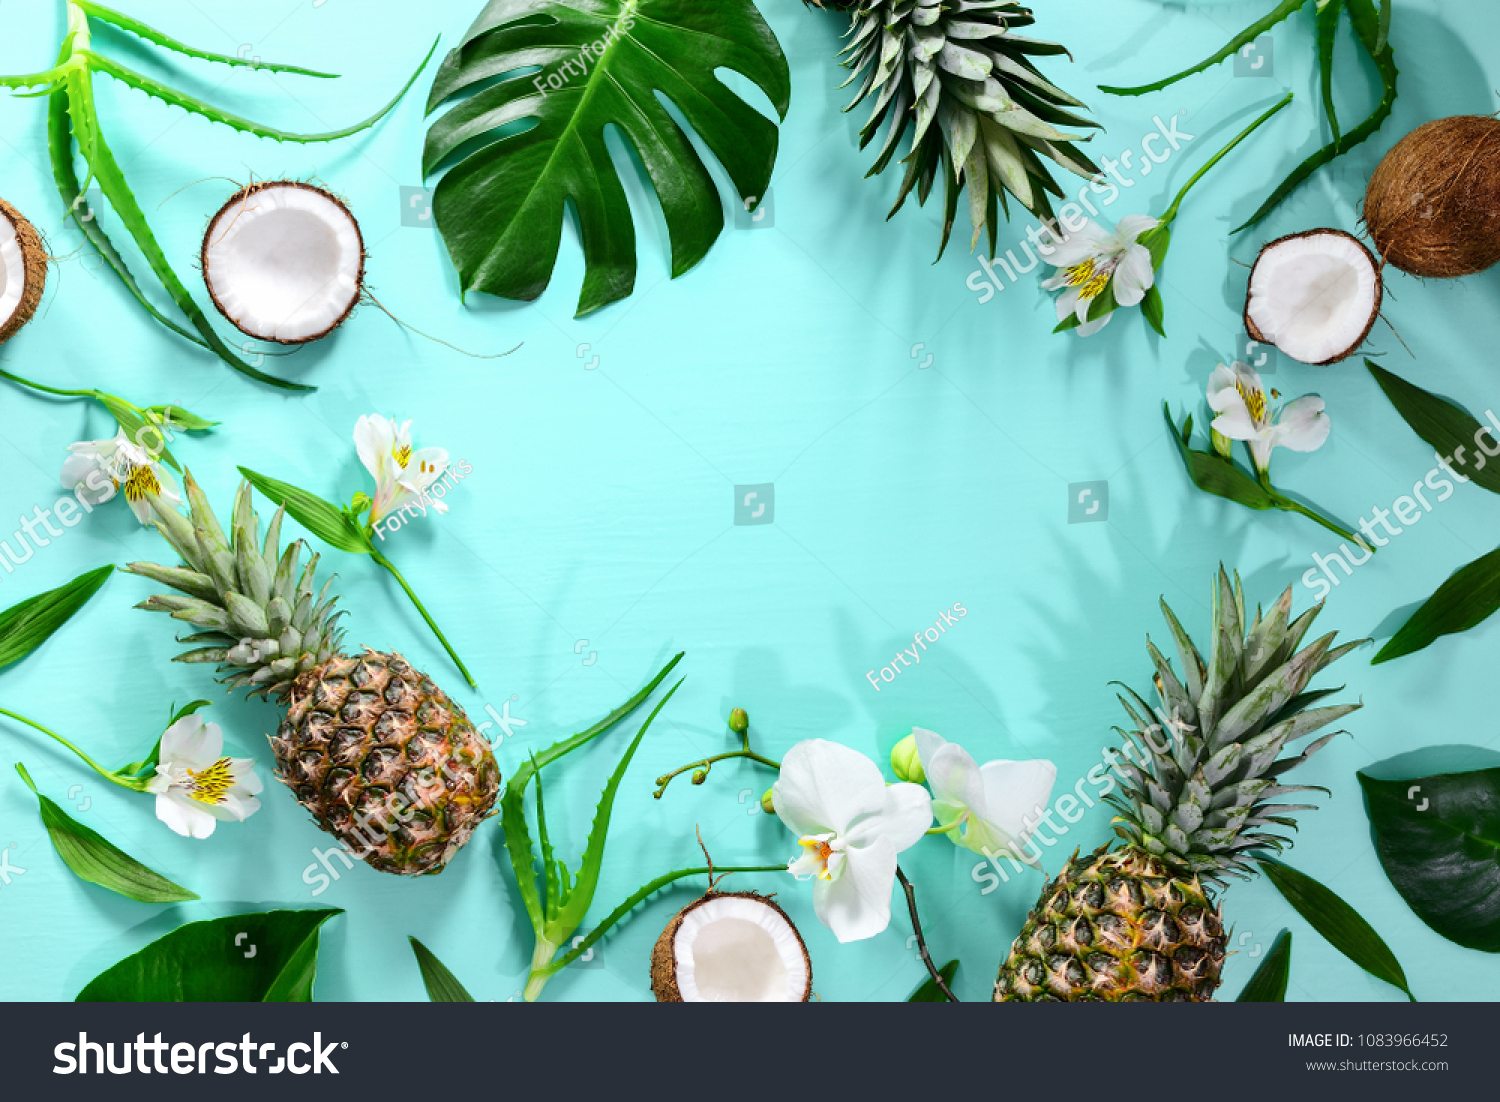 Summer tropical background with a space for a text, various fruits, green leaves and flowers arranged in a way that light shadows are fallen on the background surface, helping to keep some sum #1083966452